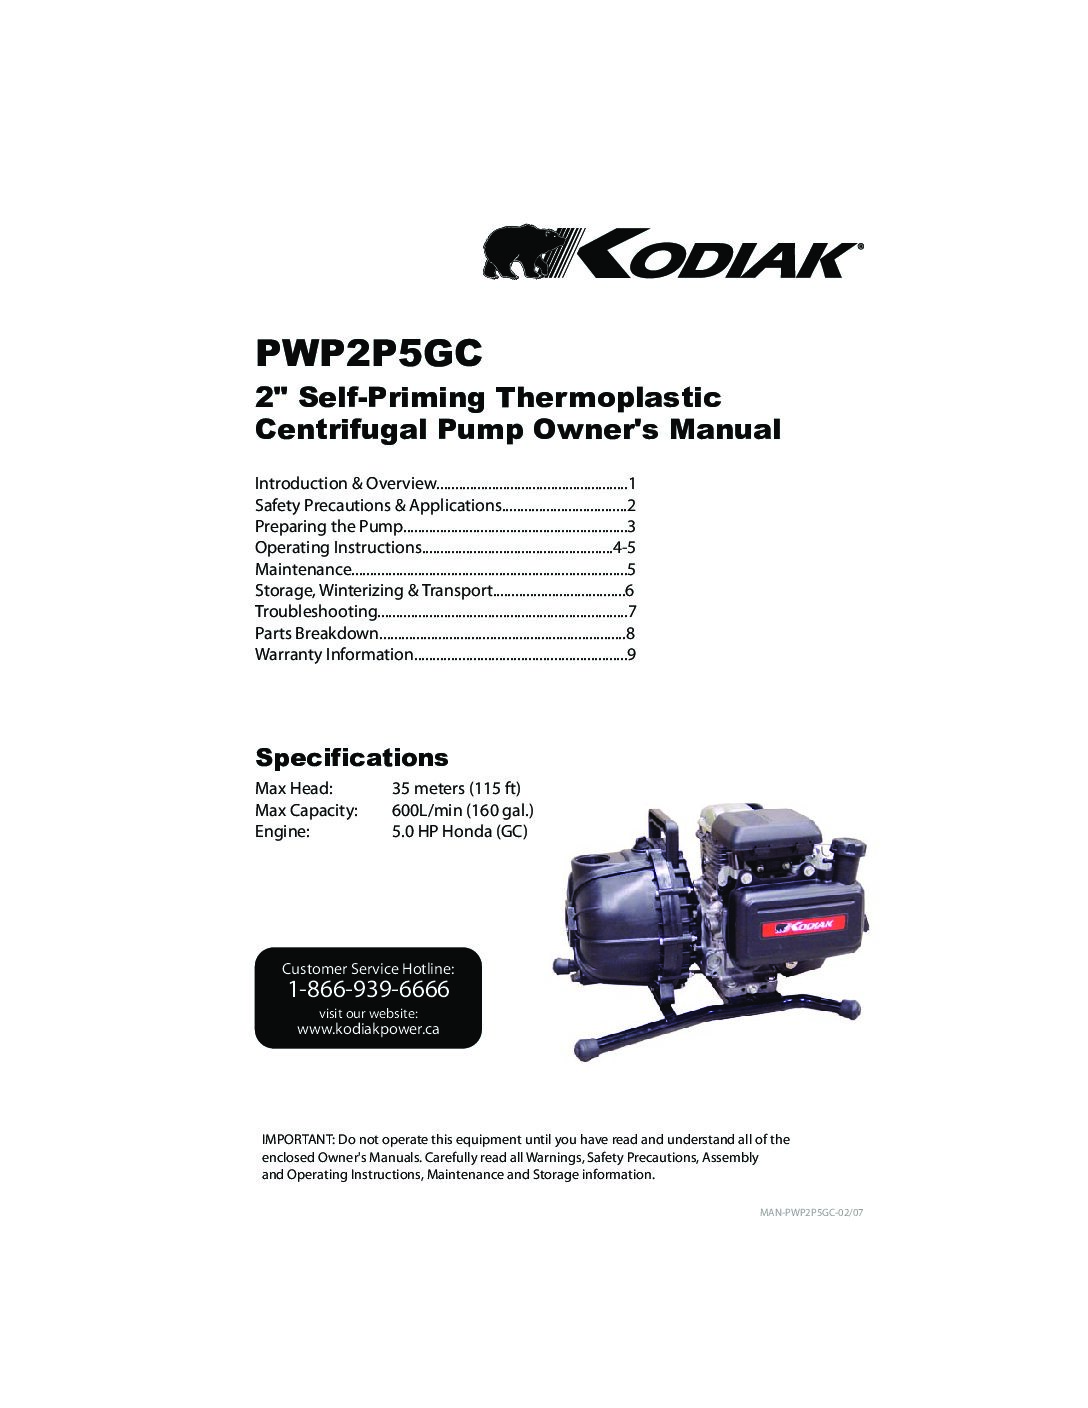 PWP3P15RT Owners Manual